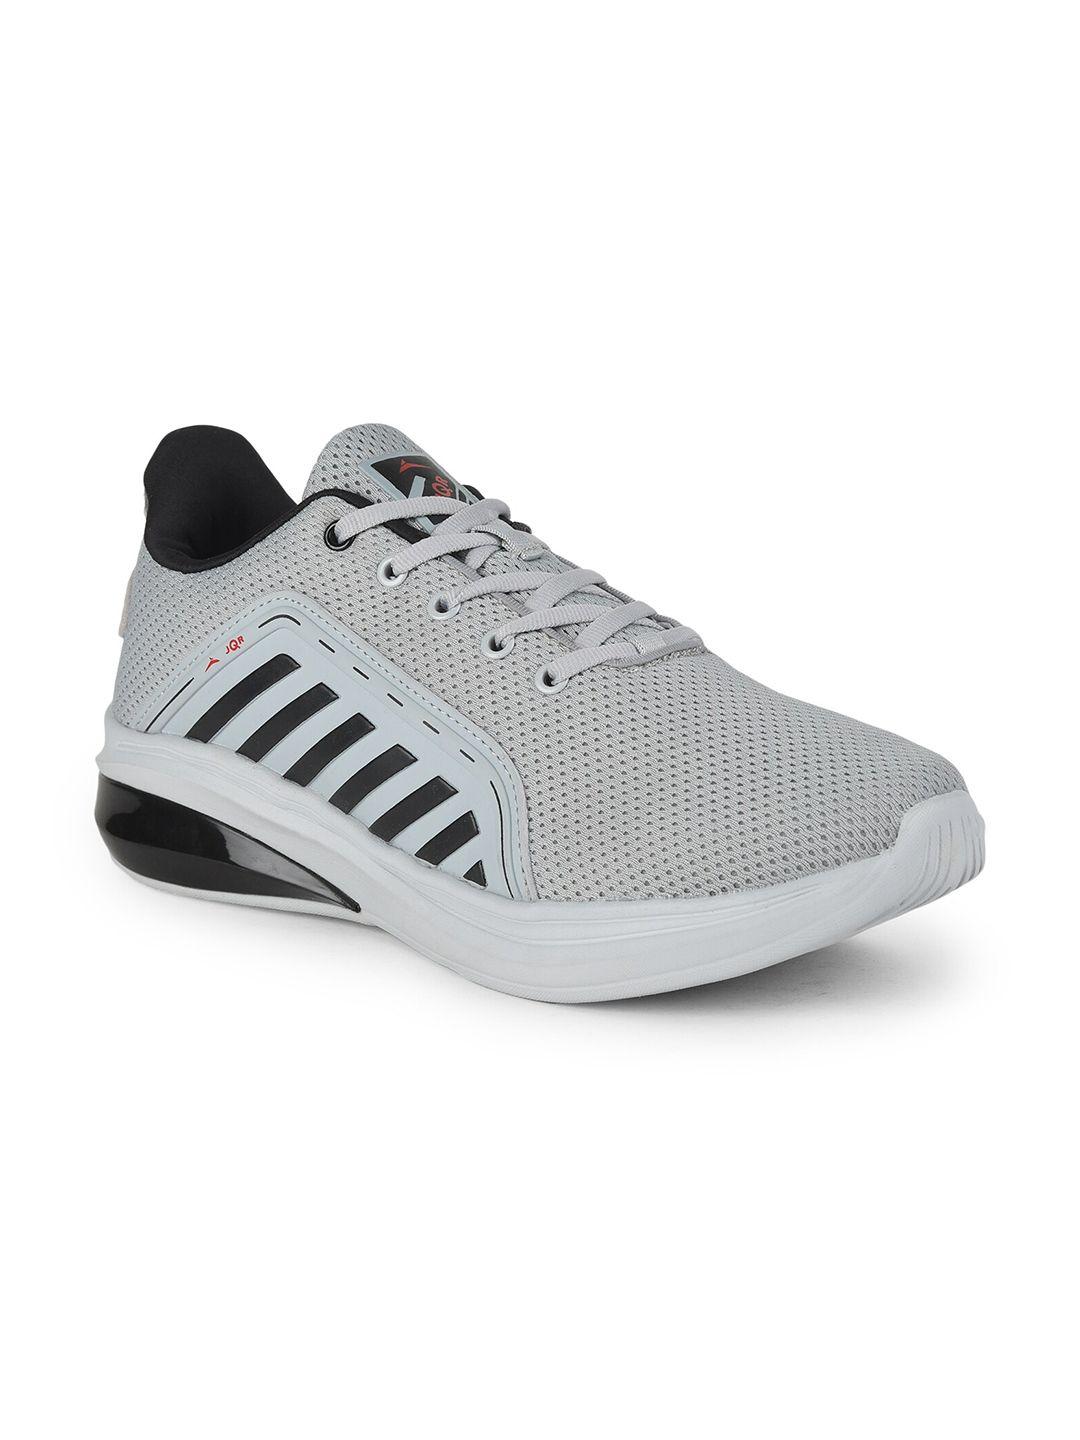 jqr men grey mesh running lace up mid-top sports shoes